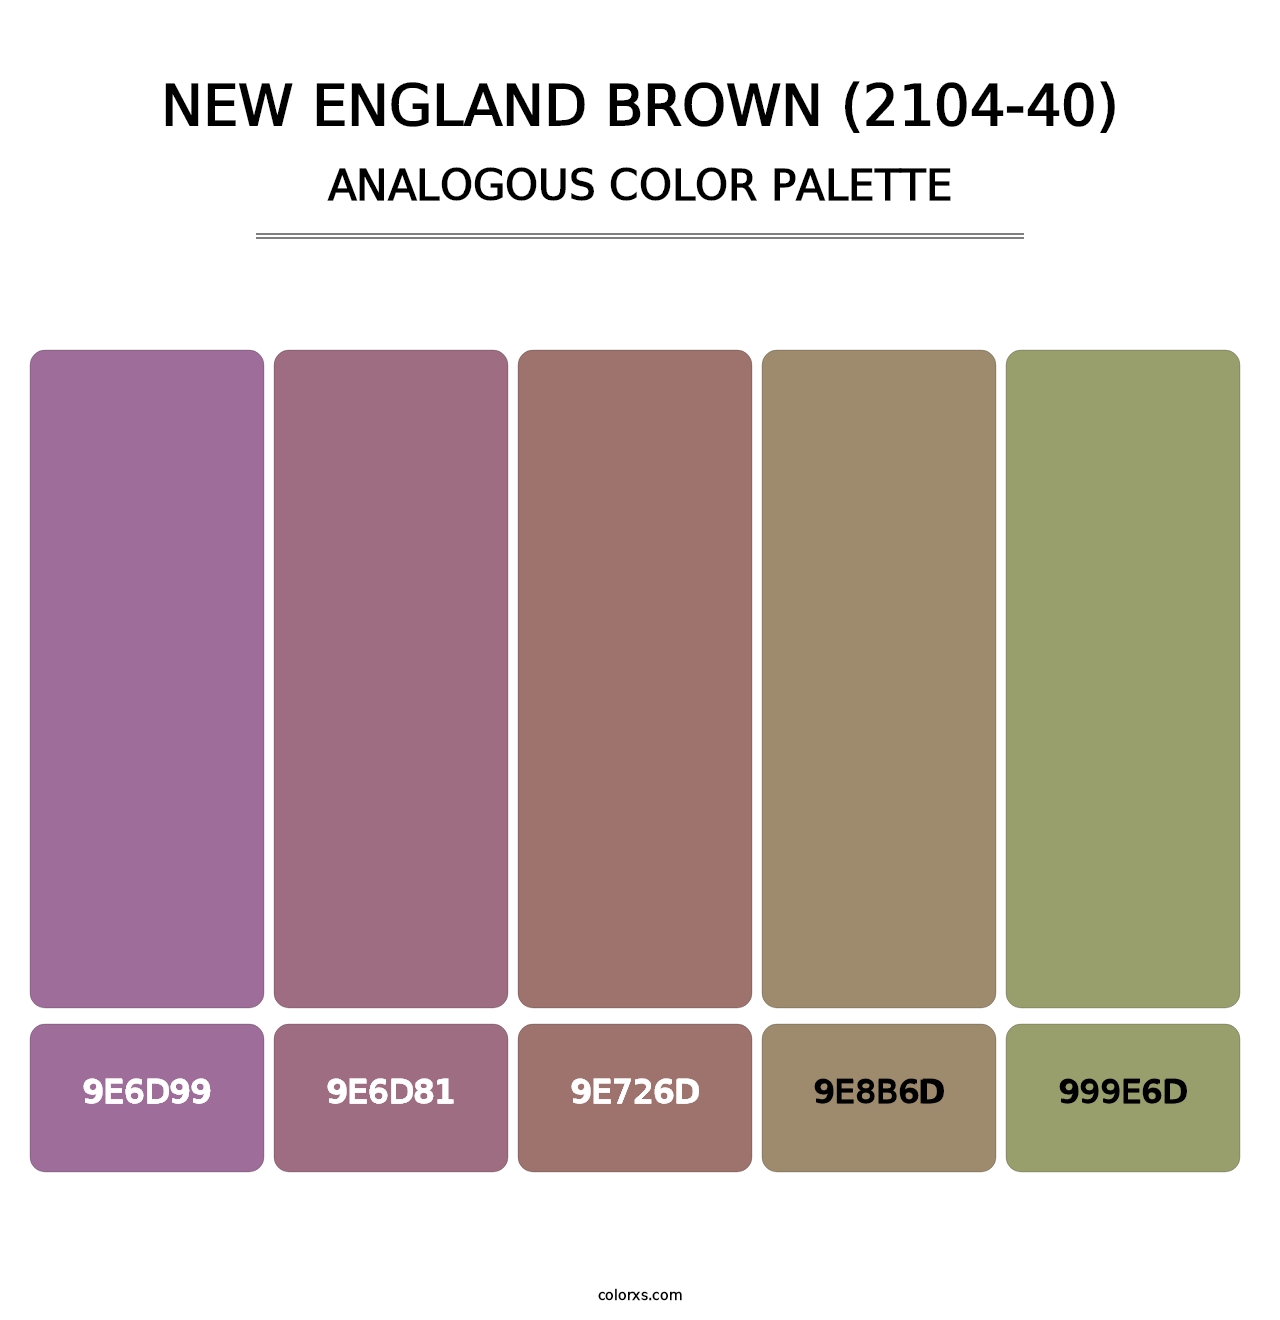 New England Brown (2104-40) - Analogous Color Palette